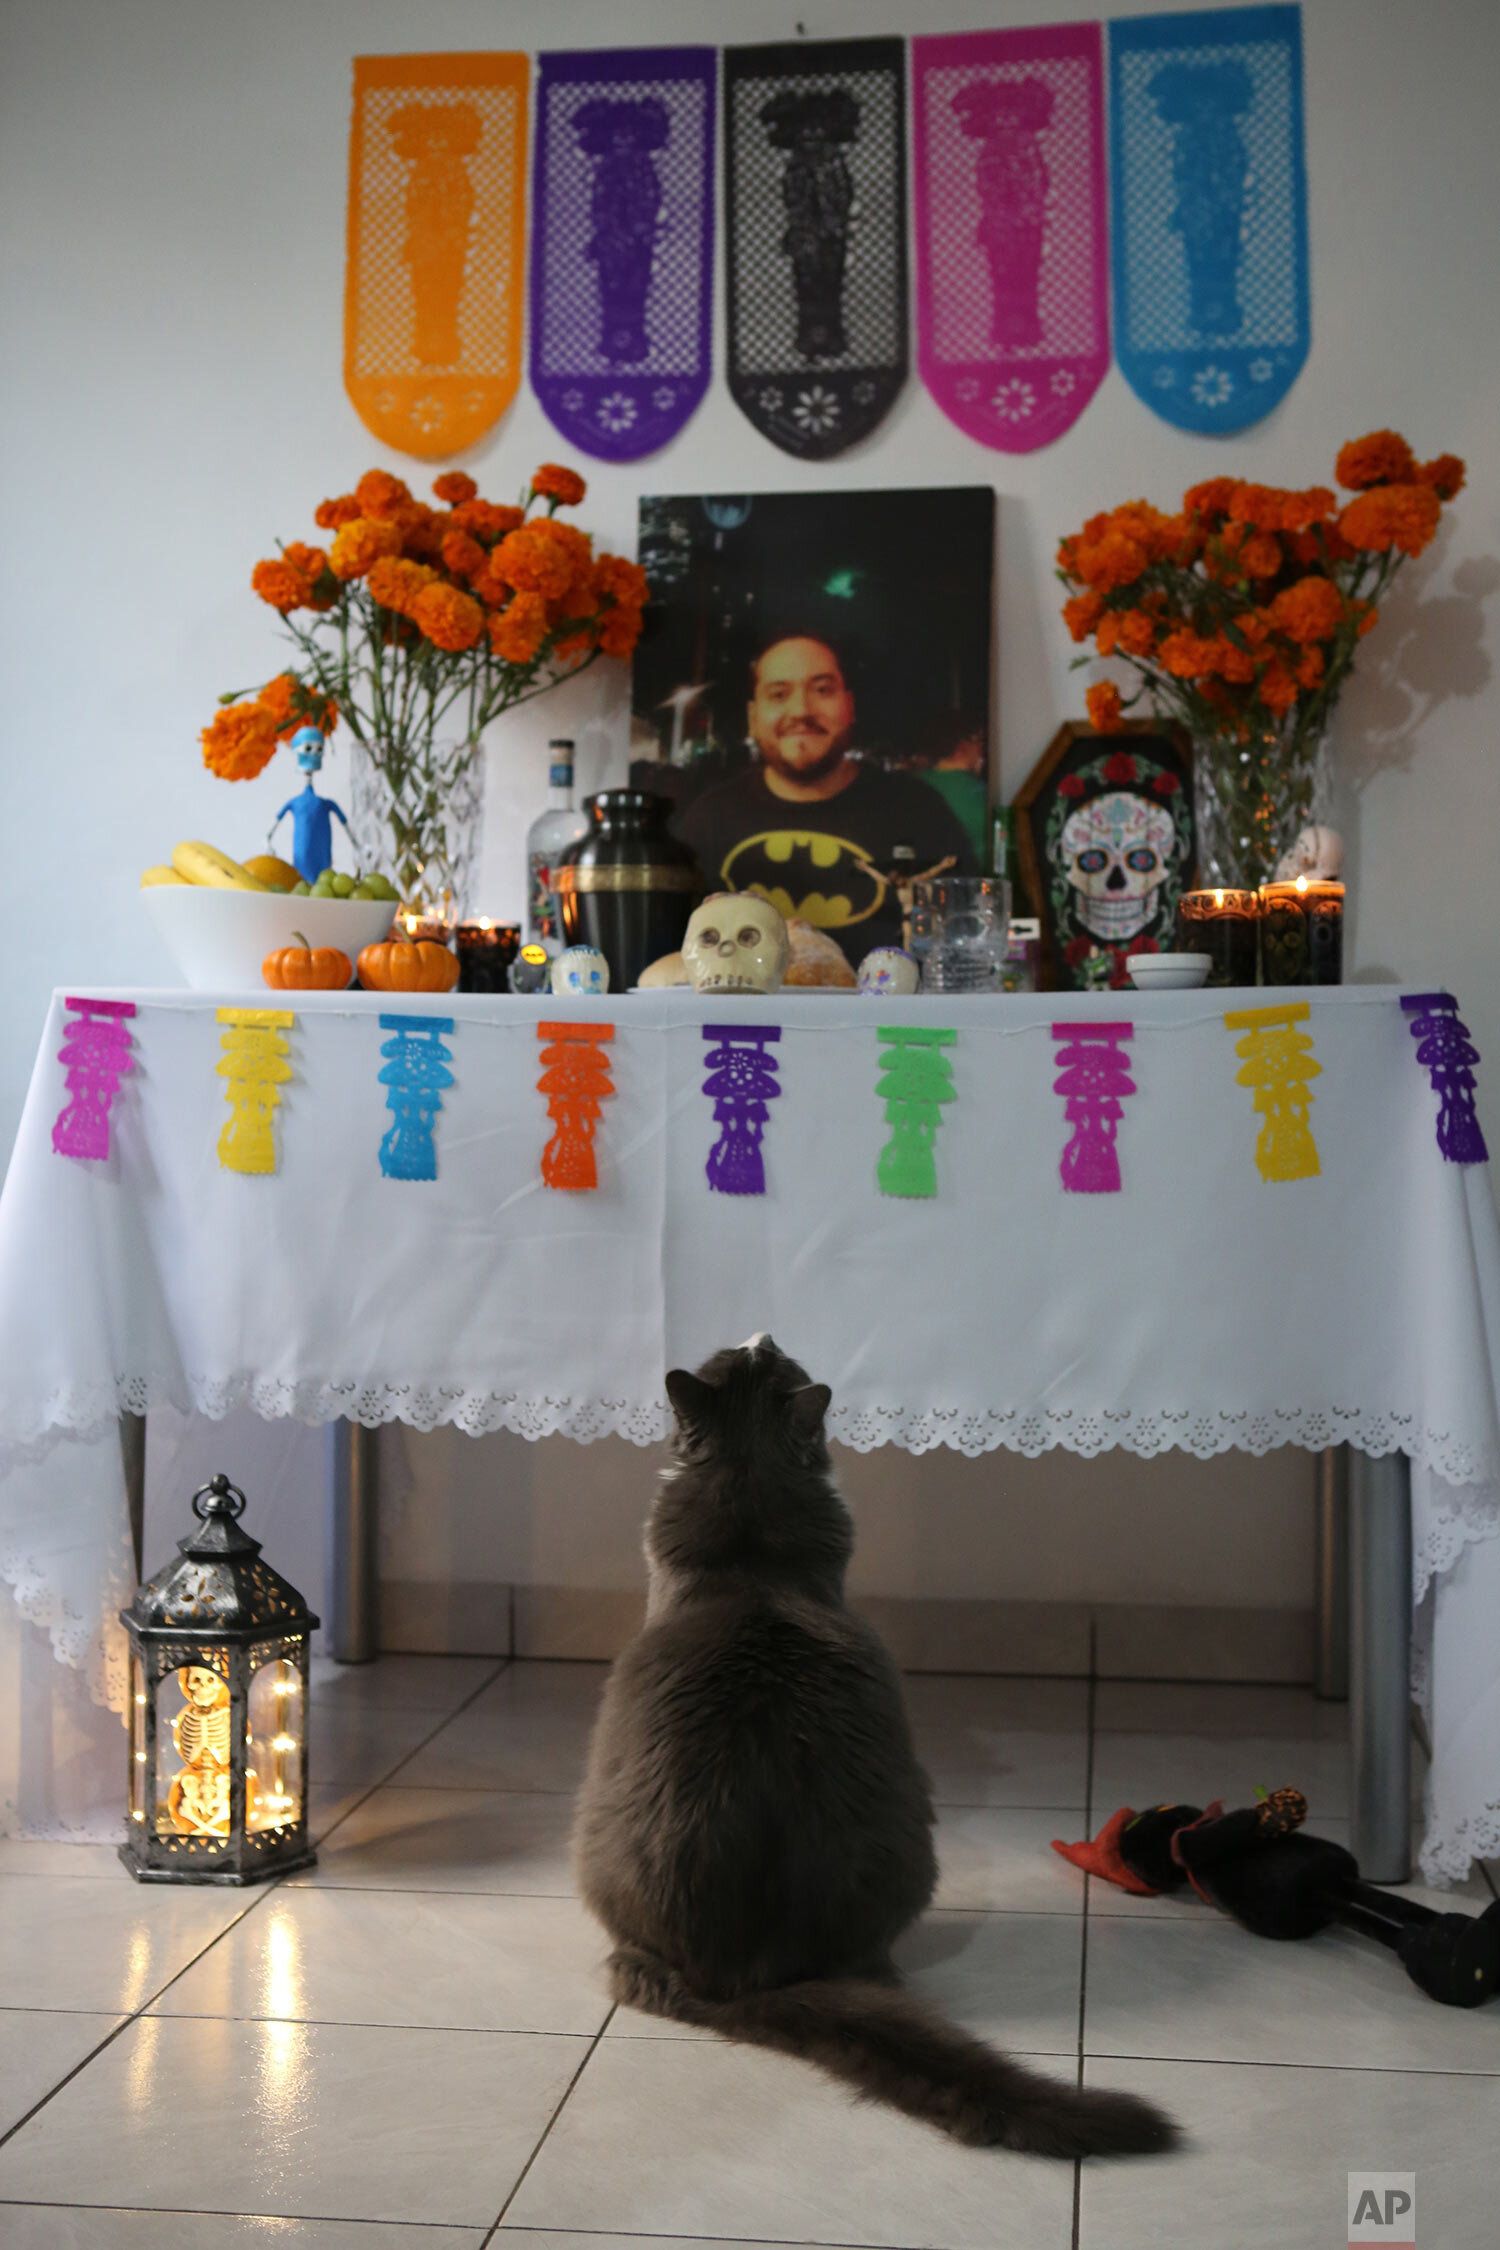  A pet cat named Actino looks at a Day of the Dead altar with a portrait of his former caretaker, Daniel Silva Montenegro, a doctor who died from symptoms related to COVID-19, at their home in Mexico City, Oct. 31, 2020. (AP Photo/Ginnette Riquelme) 